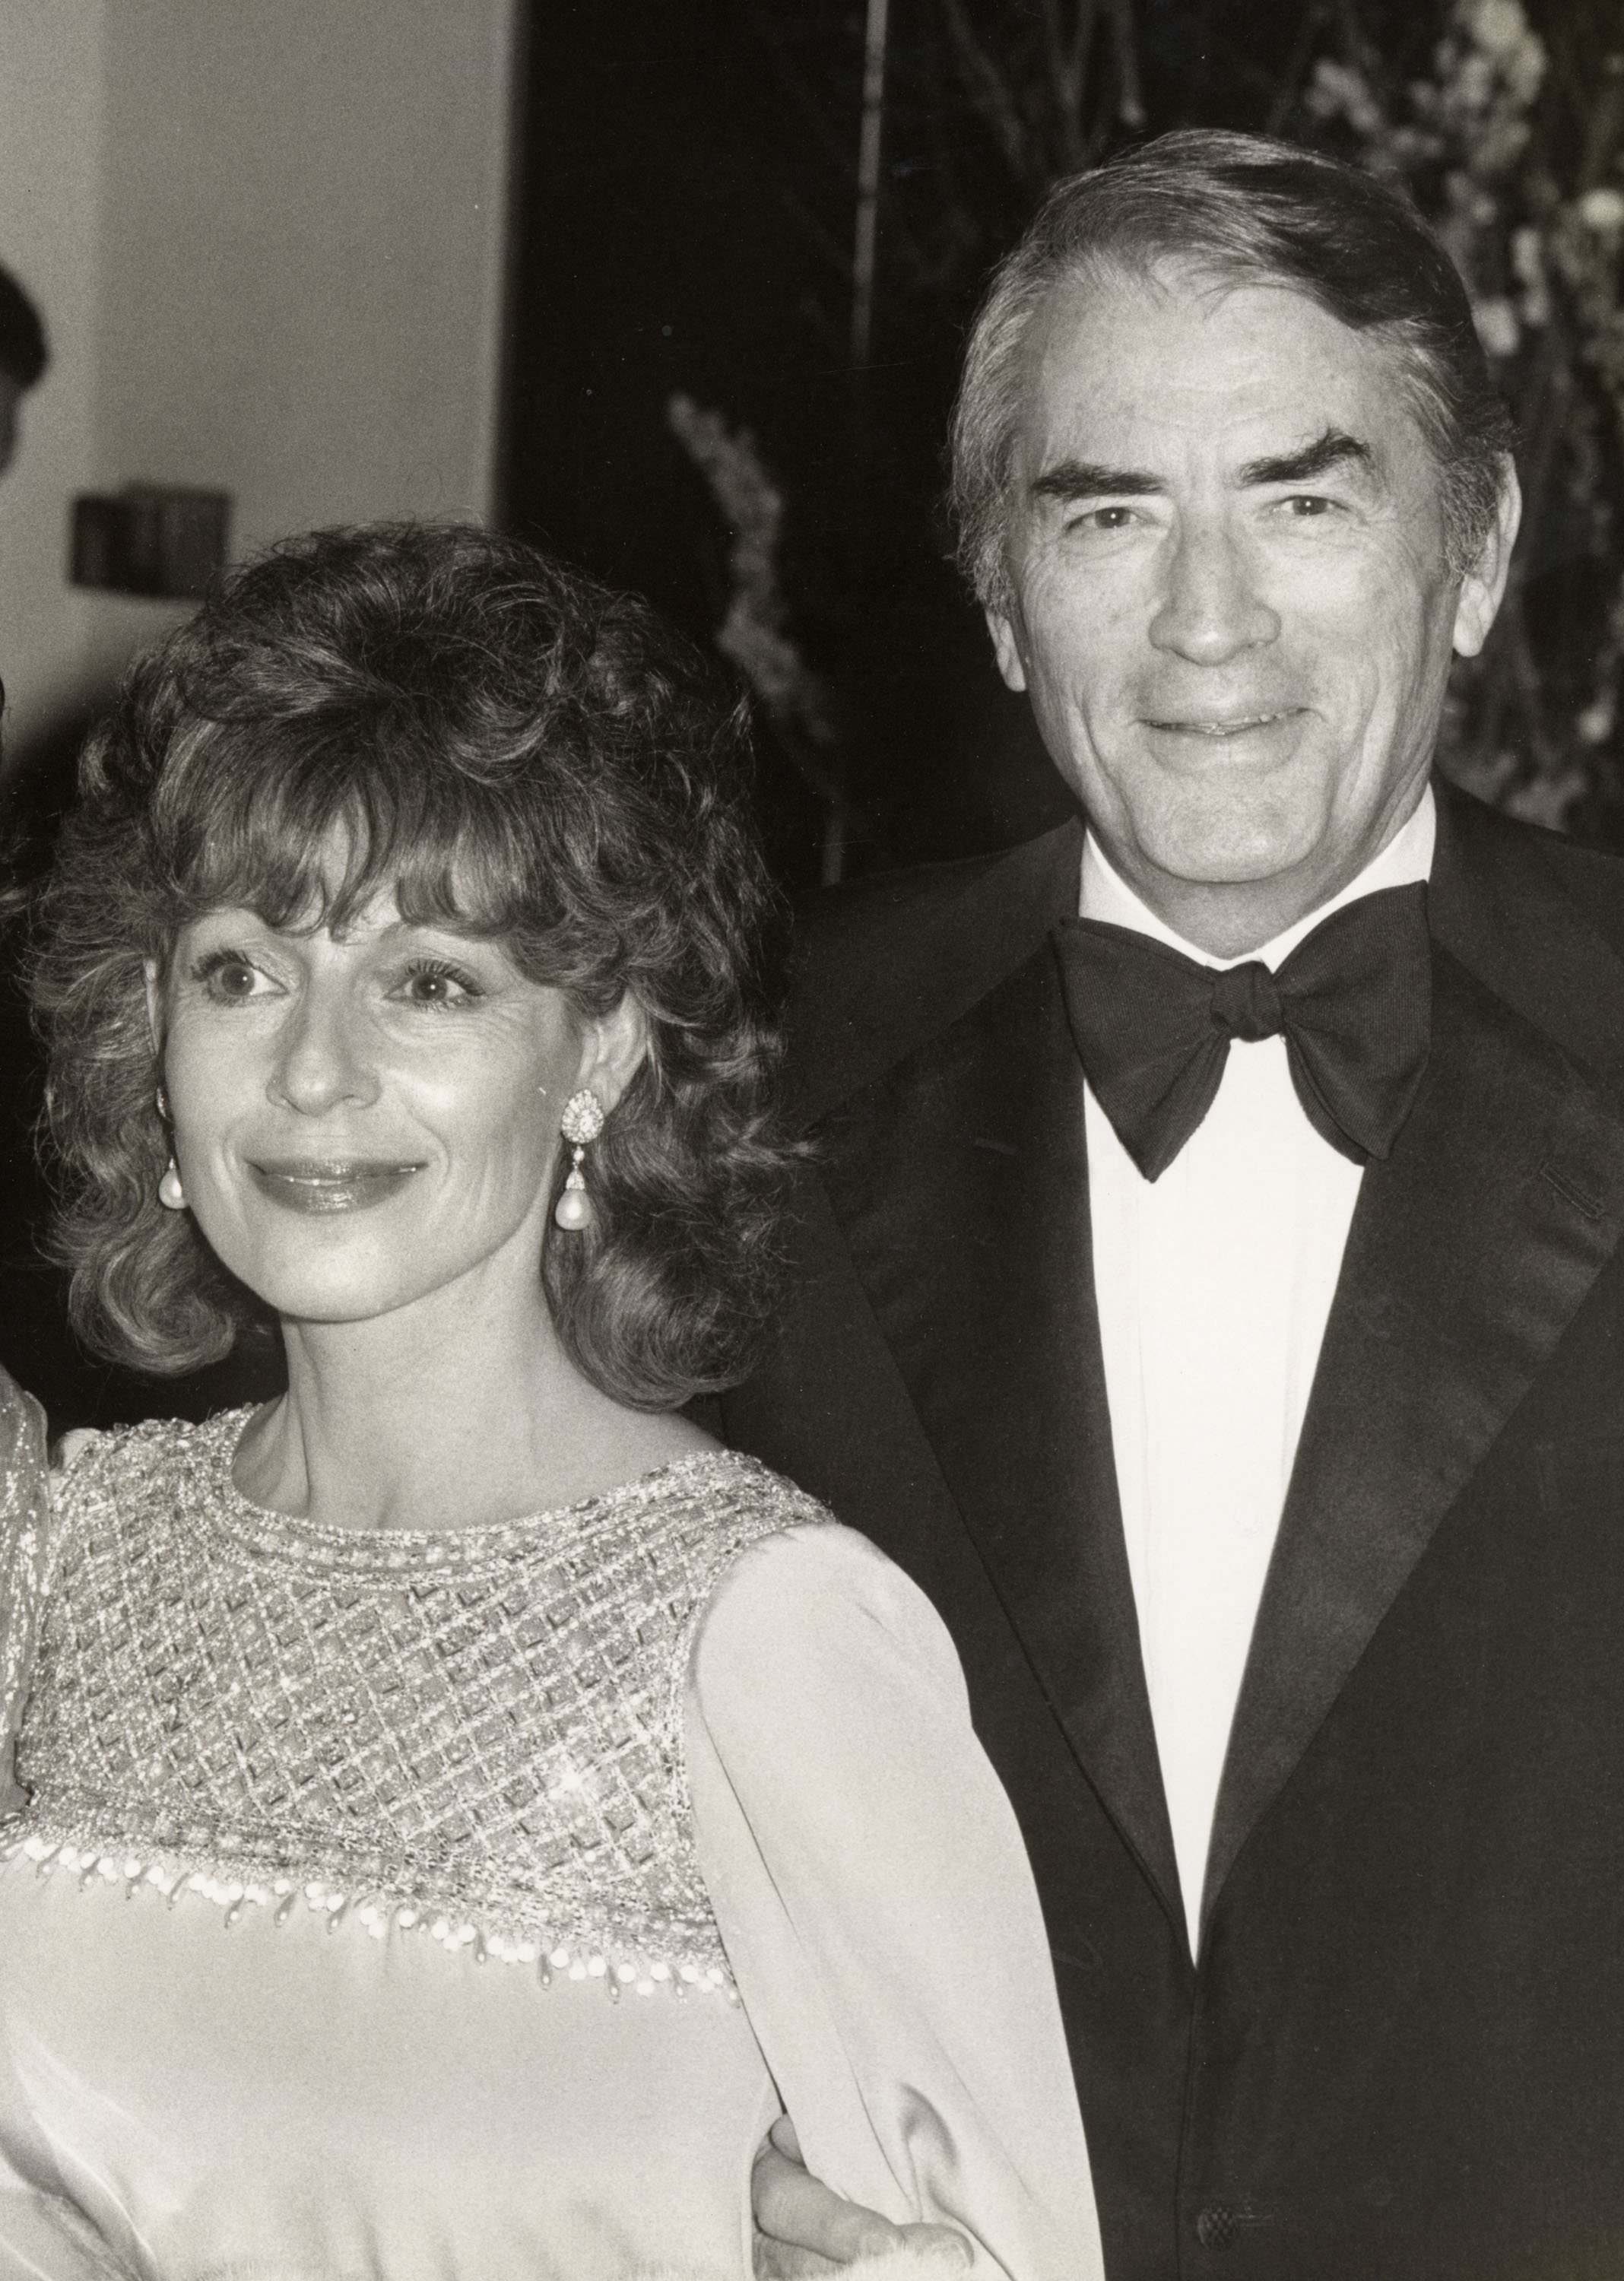 Gregory Peck and wife Veronique at Beverly Hilton Hotel in Beverly Hills, CA, United States | Source: Getty Images